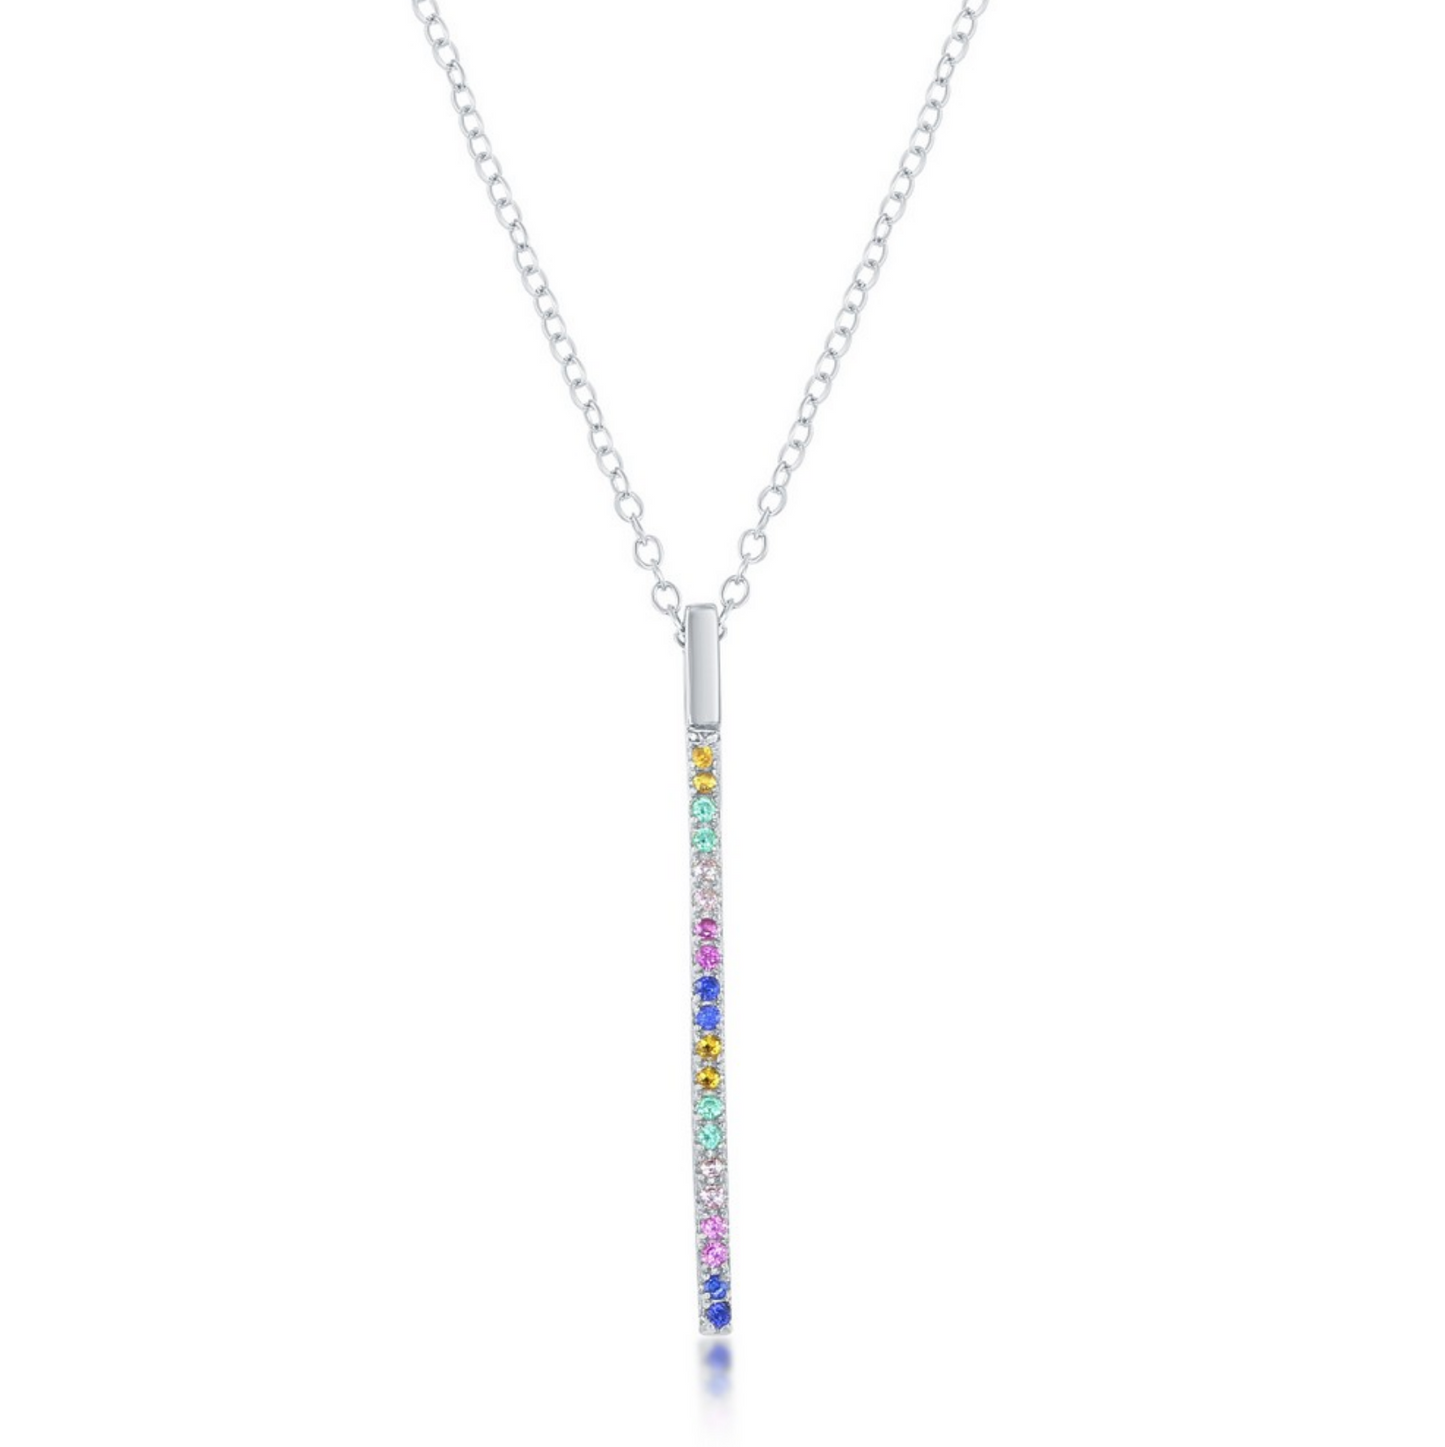 Sterling Silver Rainbow CZ Vertical Bar Necklace - Gold Plated